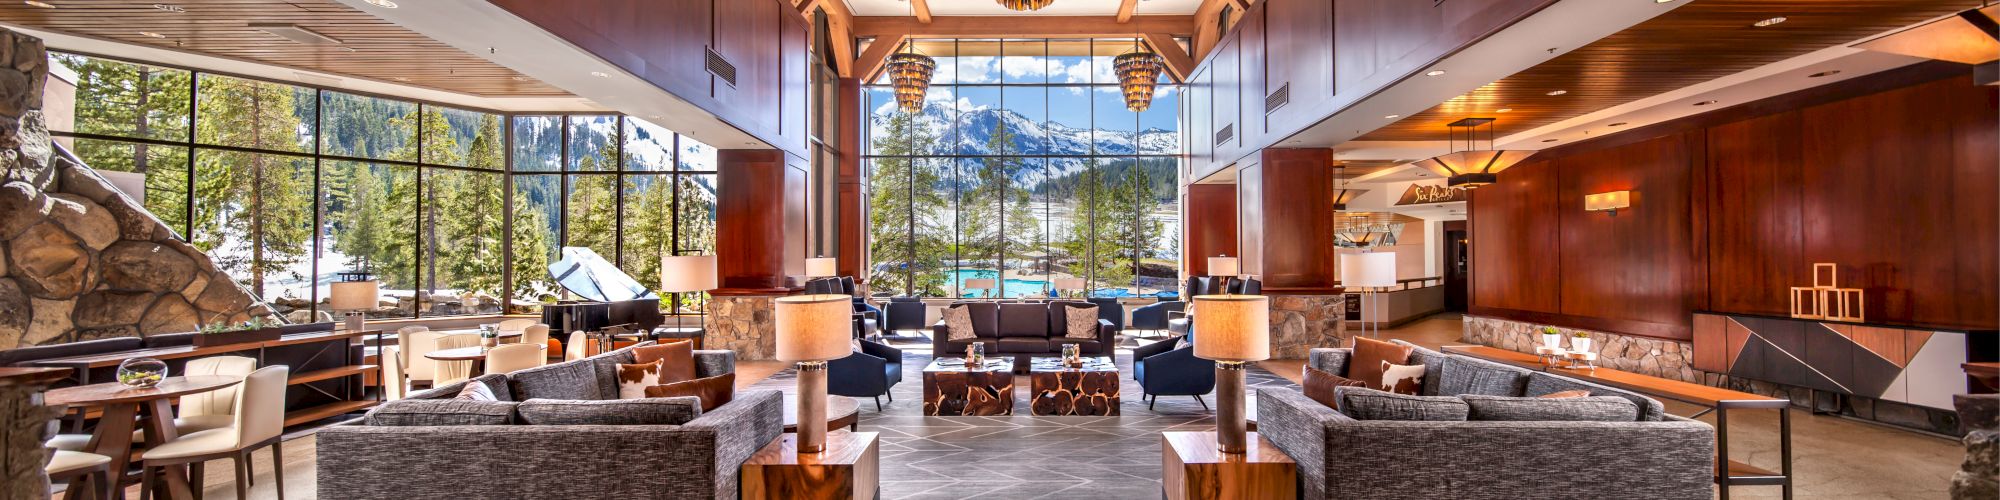 The image shows a spacious hotel lobby with modern furnishings, large windows offering scenic views, a high ceiling, and stylish pendant lights.